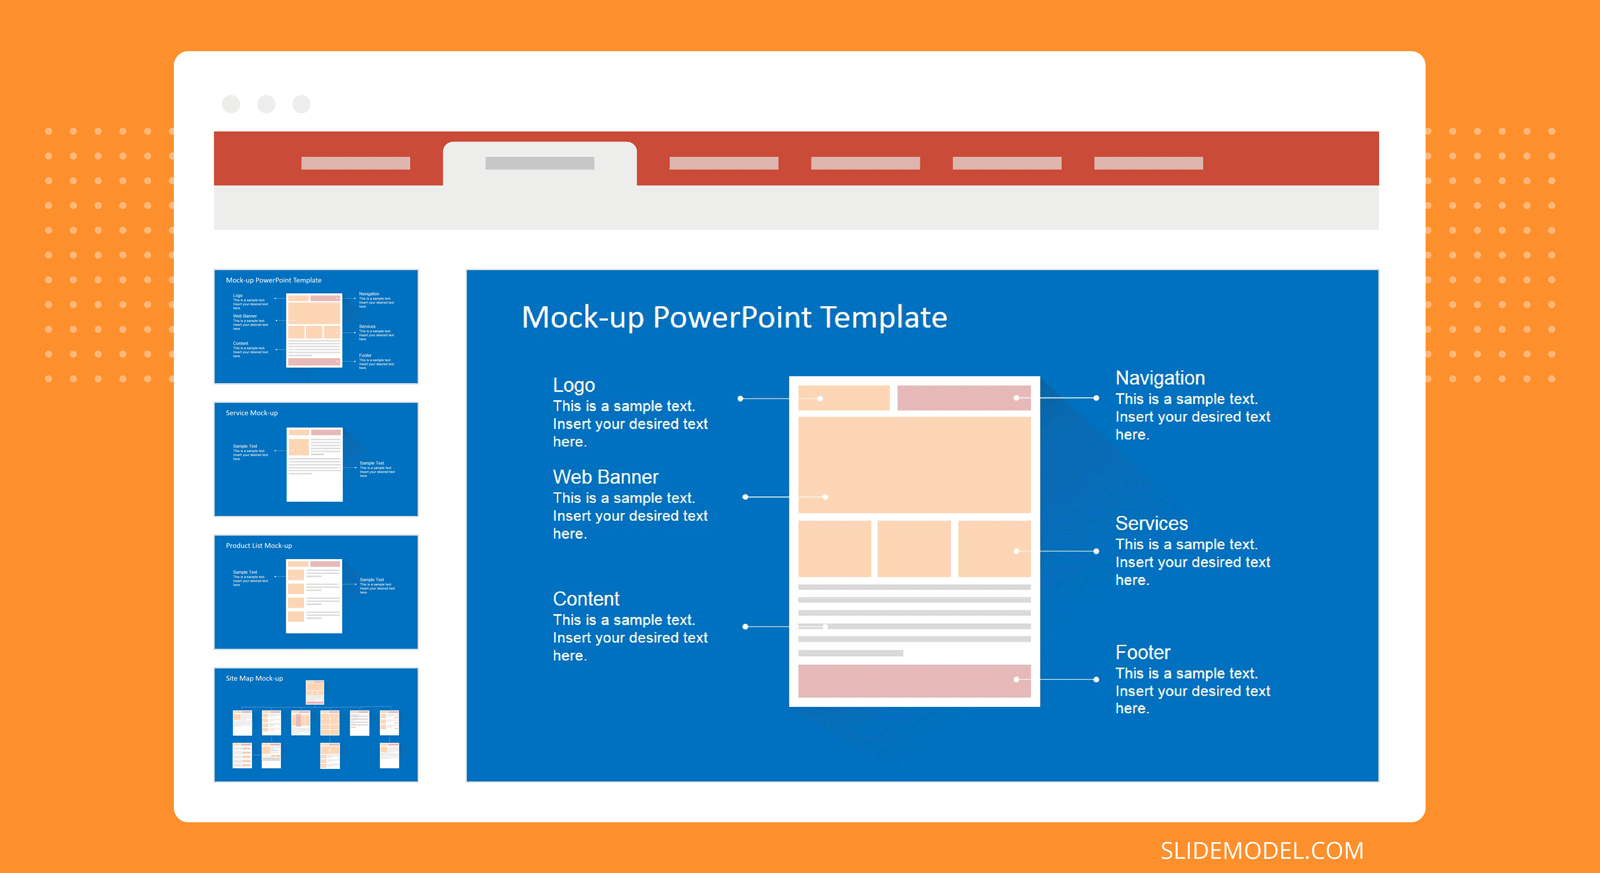 Prototyping template slide design for requirements gathering